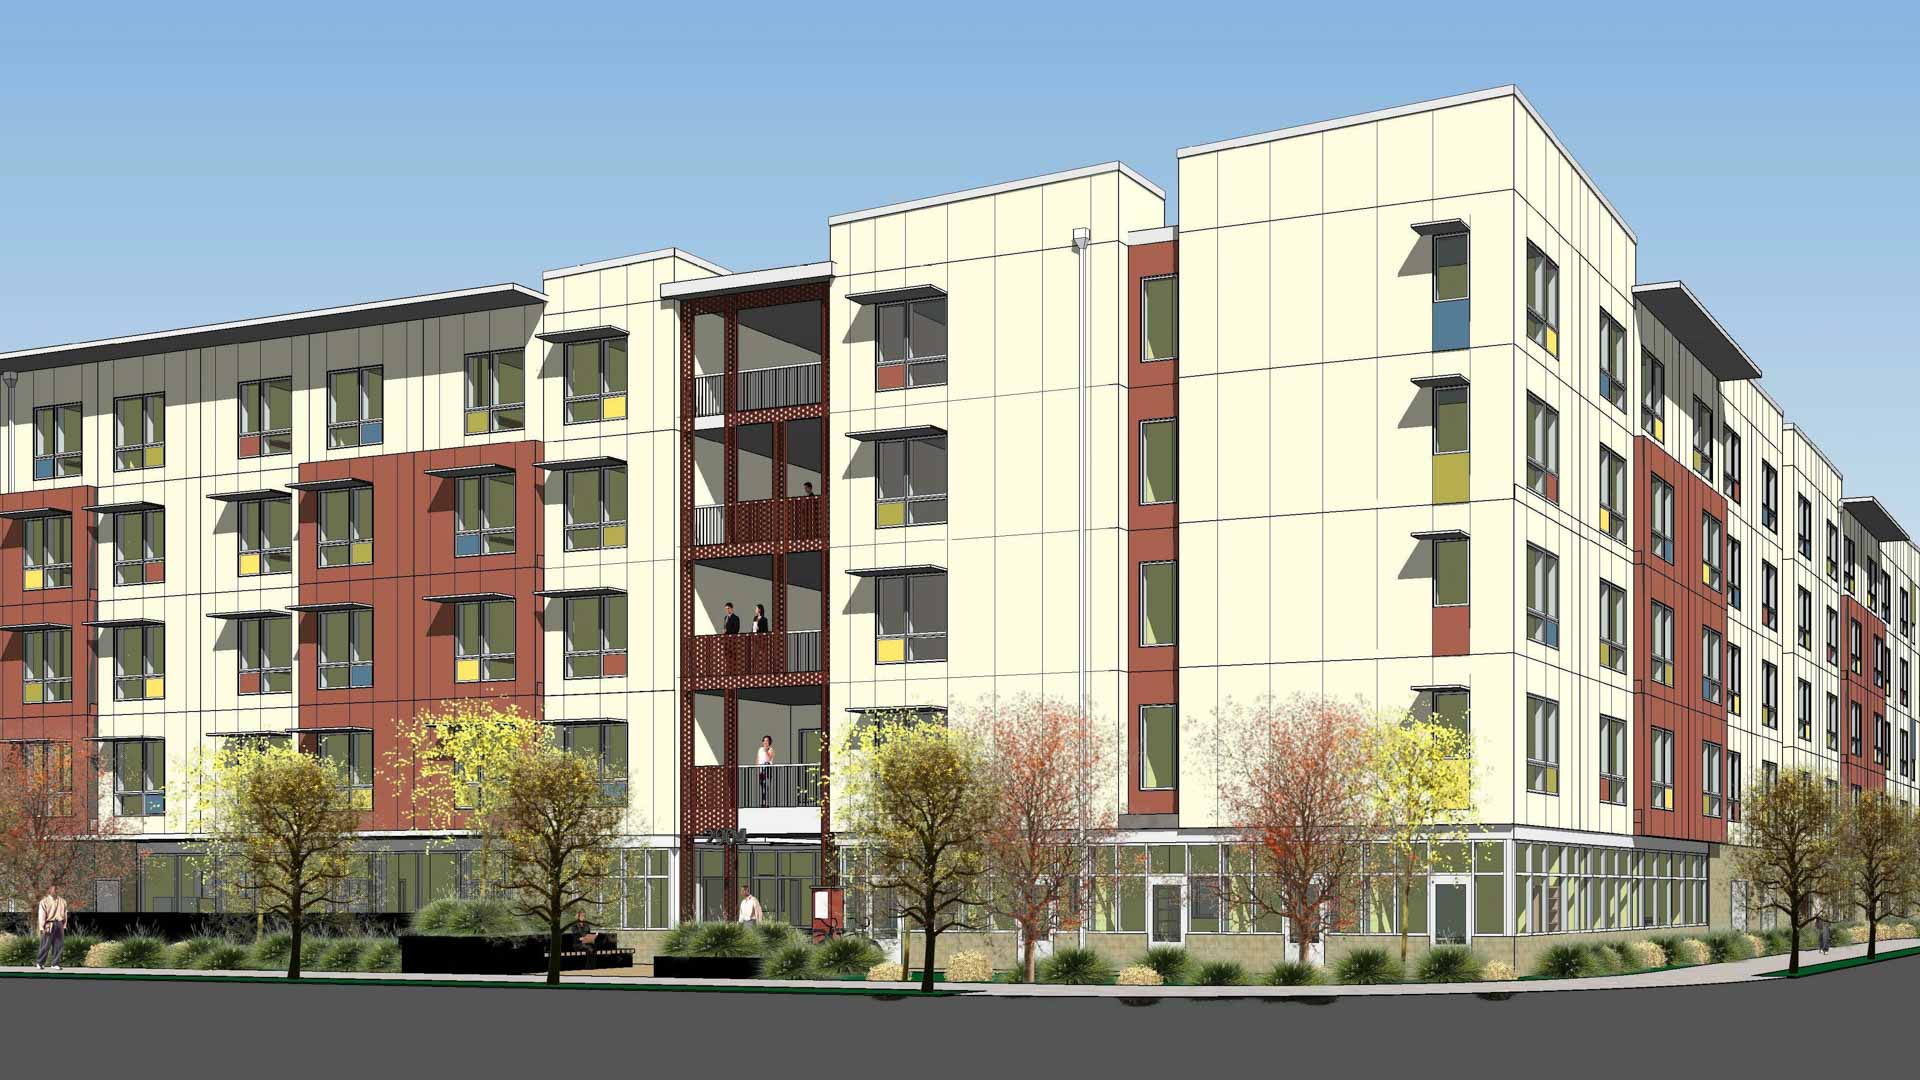 Cahill Contractors Affordable Housing Experience: Calabazas Community Apartments